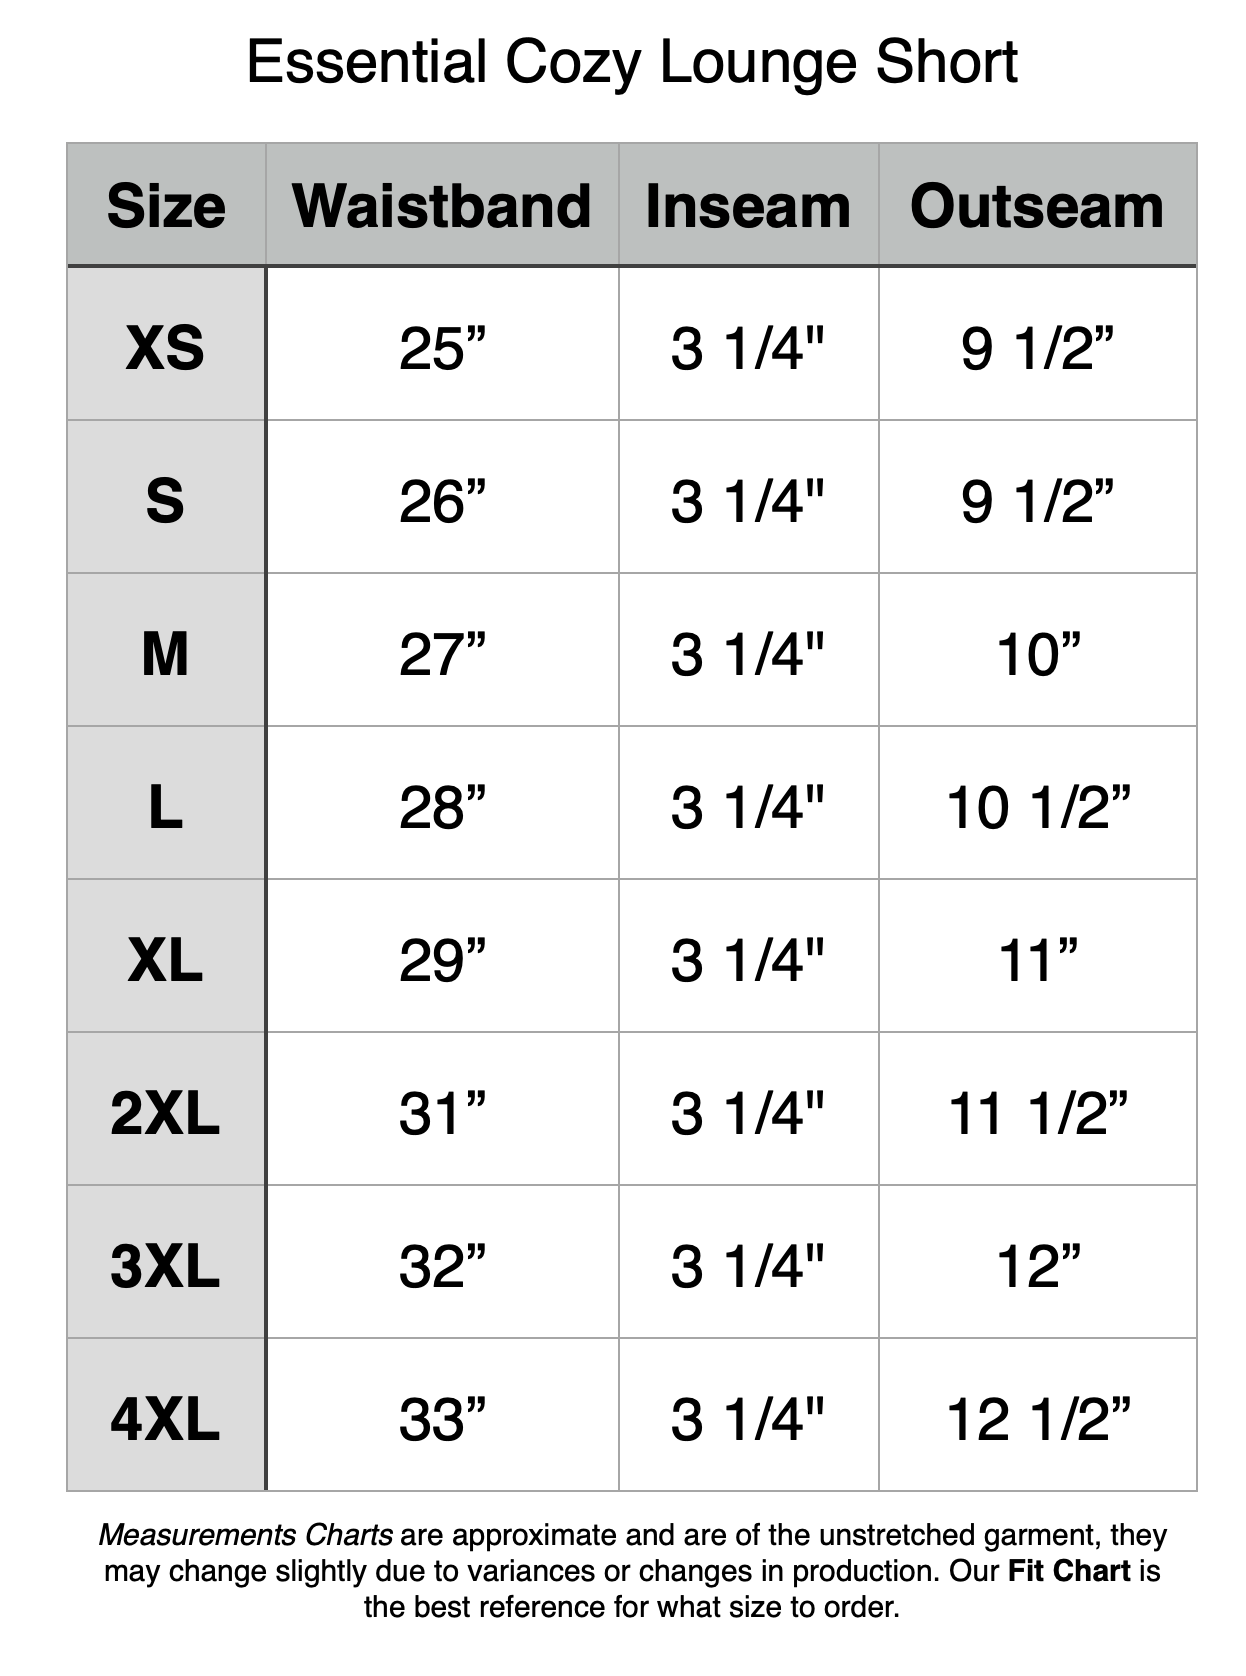 Essential Cozy Lounge Short: XS - 25" Waistband, 3.25" Inseam, 9.5" Outseam. S - 26" Waistband, 3.25" Inseam, 9.5" Outseam. M - 27" Waistband, 3.25" Inseam, 10" Outseam. L - 28" Waistband, 3.25" Inseam, 10.5" Outseam. XL - 29" Waistband, 3.25" Inseam, 11" Outseam. 2XL - 31" Waistband, 3.25" Inseam, 11.5" Outseam. 3XL - 32" Waistband, 3.25" Inseam, 12" Outseam. 4XL - 33" Waistband, 3.25" Inseam, 12.5" Outseam.